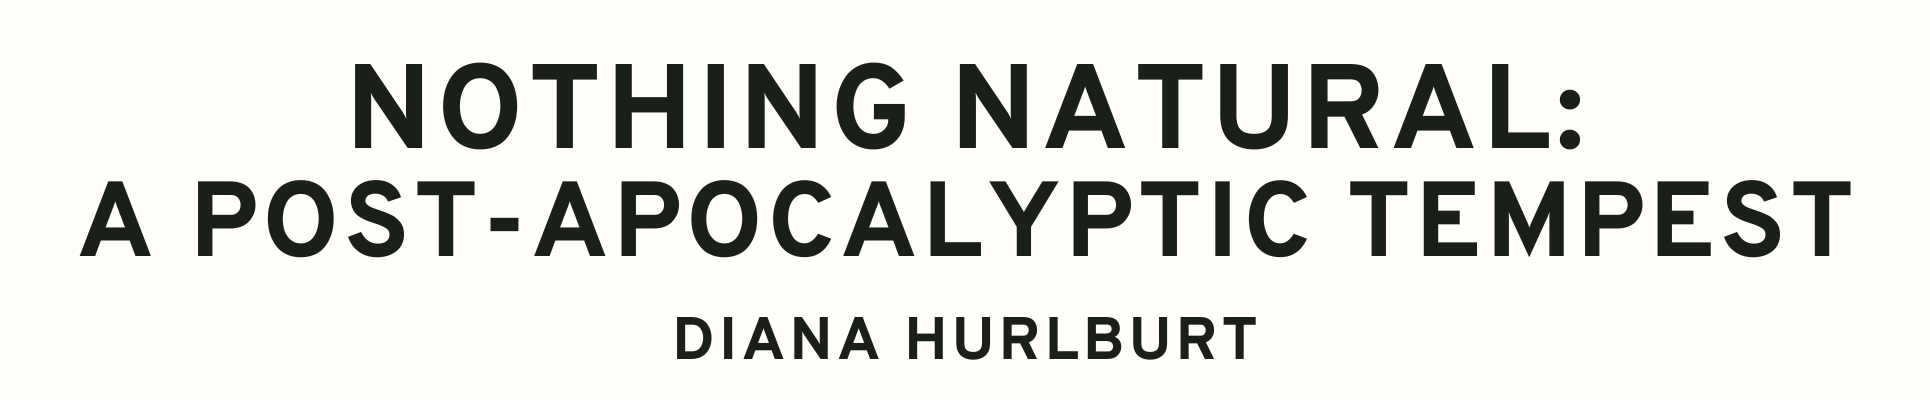 Nothing Natural: A Post-Apocalyptic Tempest